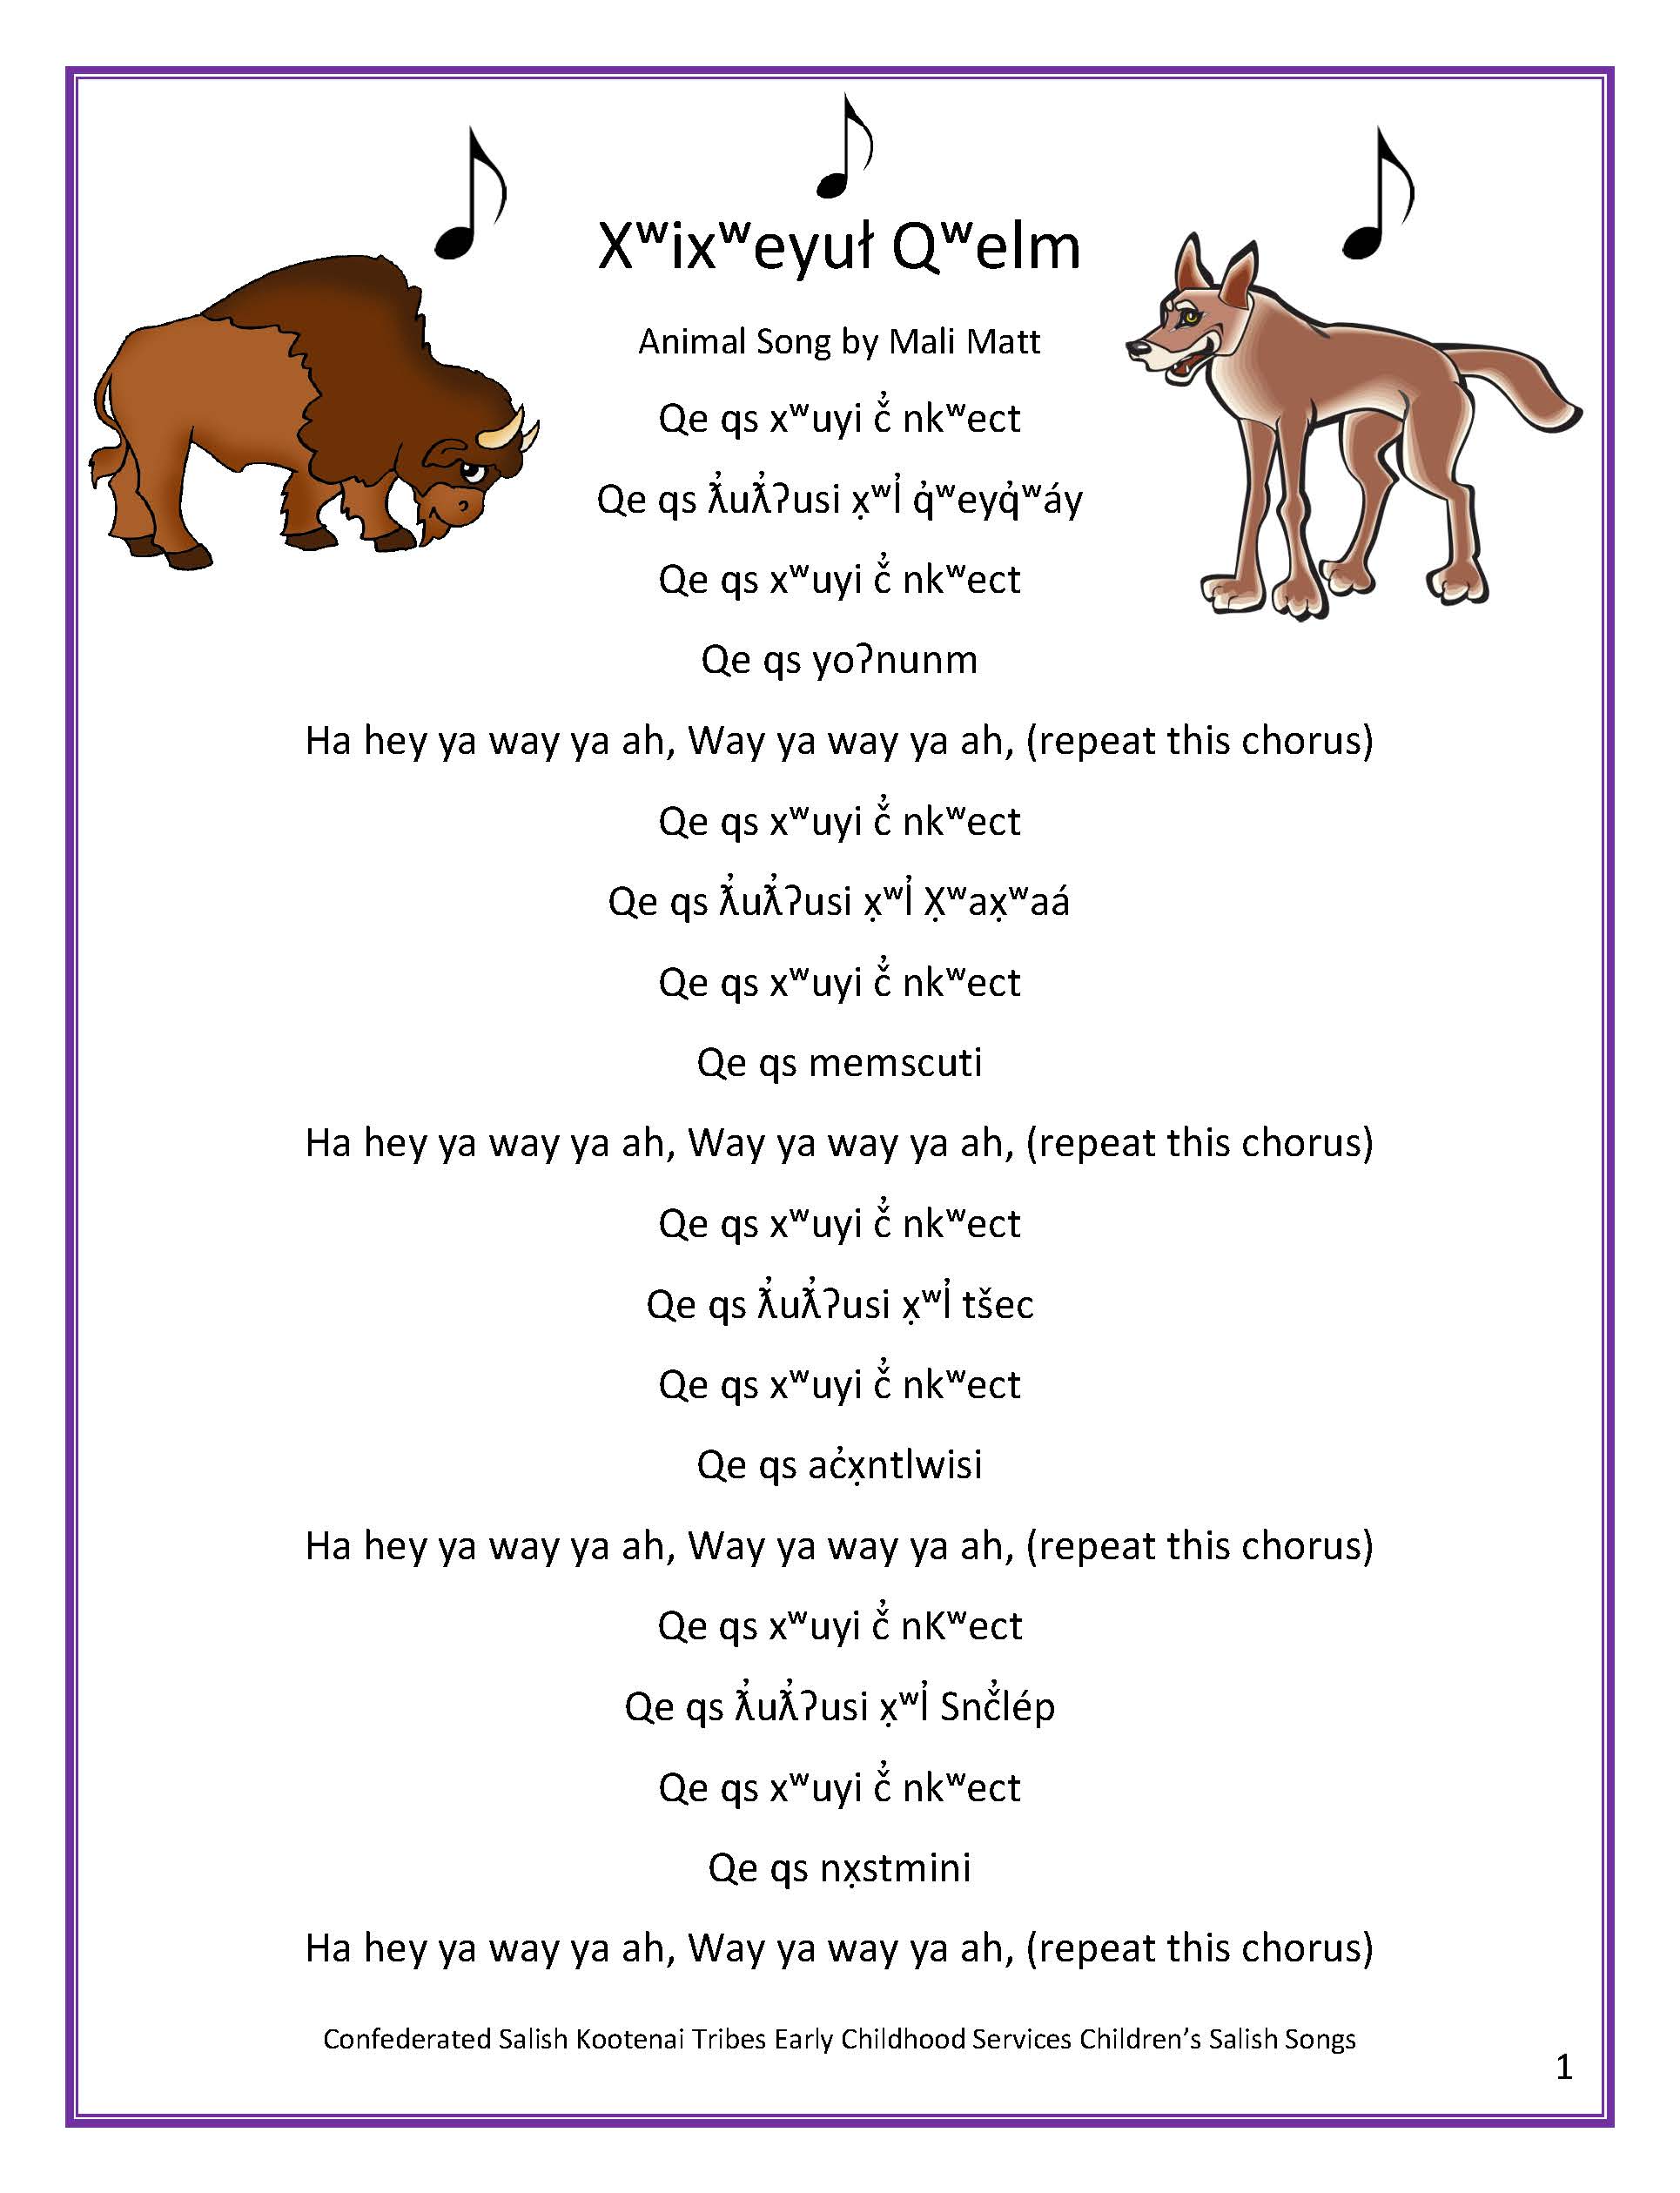 ECS Childrens Salish Song Book Page 06